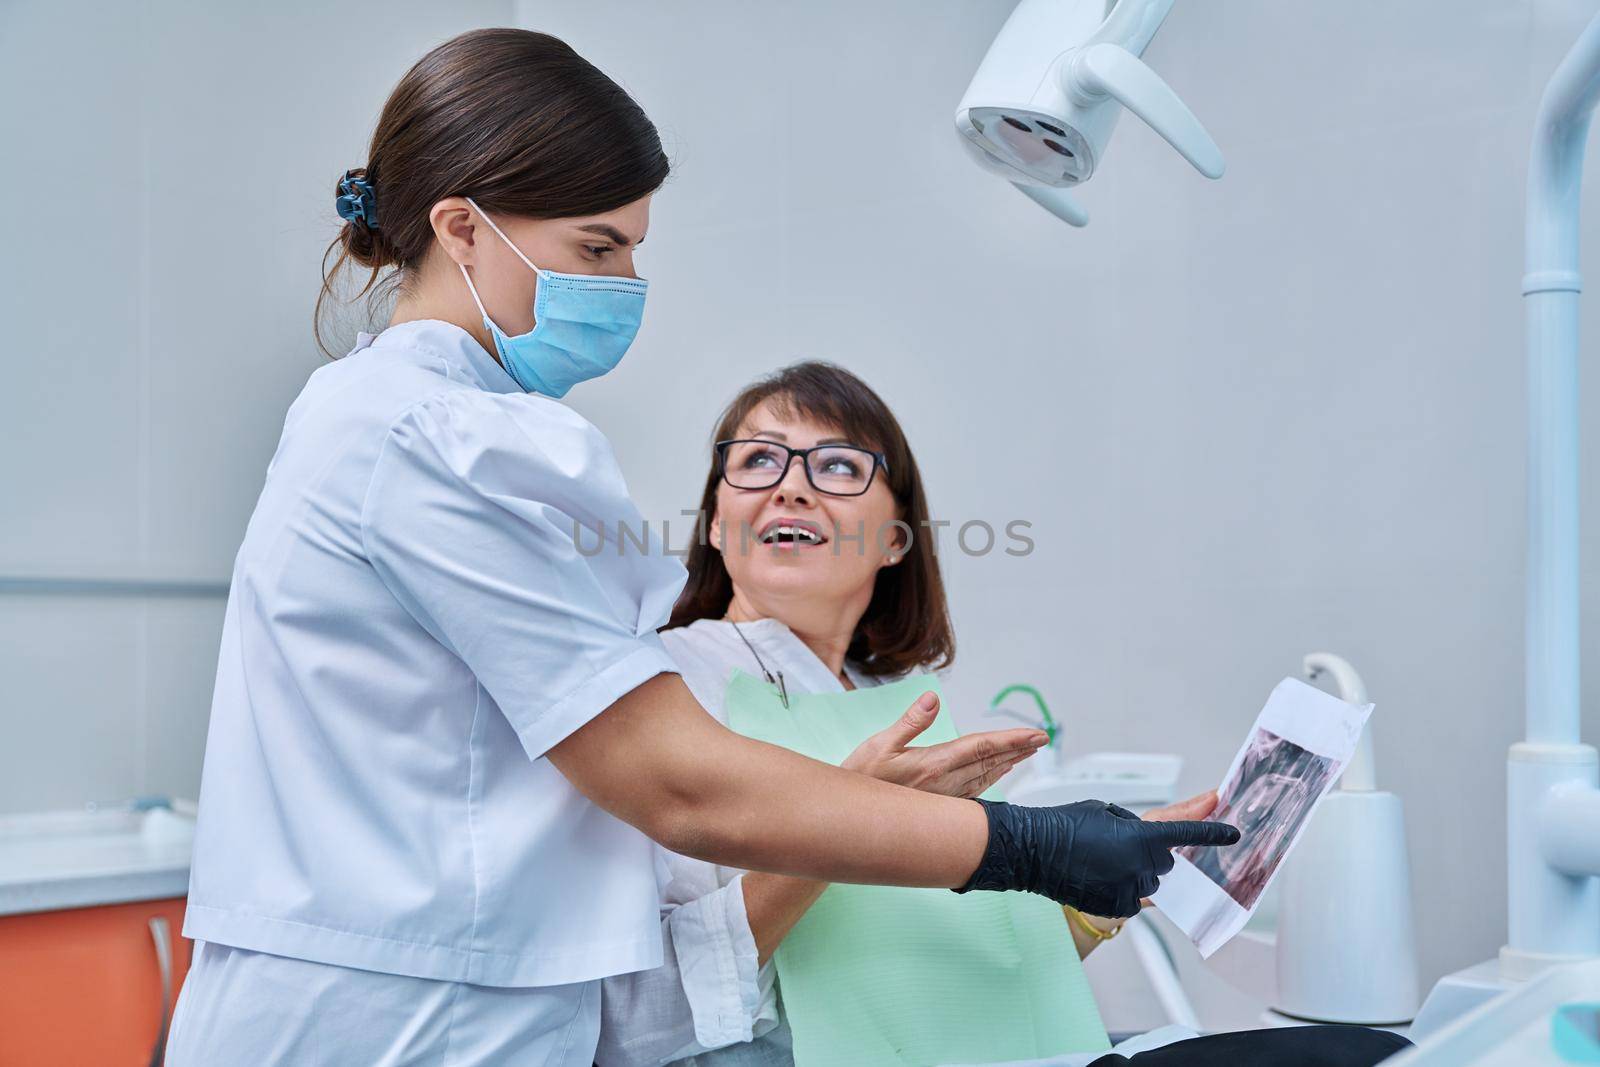 Female dentist talking to woman patient, discussing x-rays of teeth and jaws by VH-studio